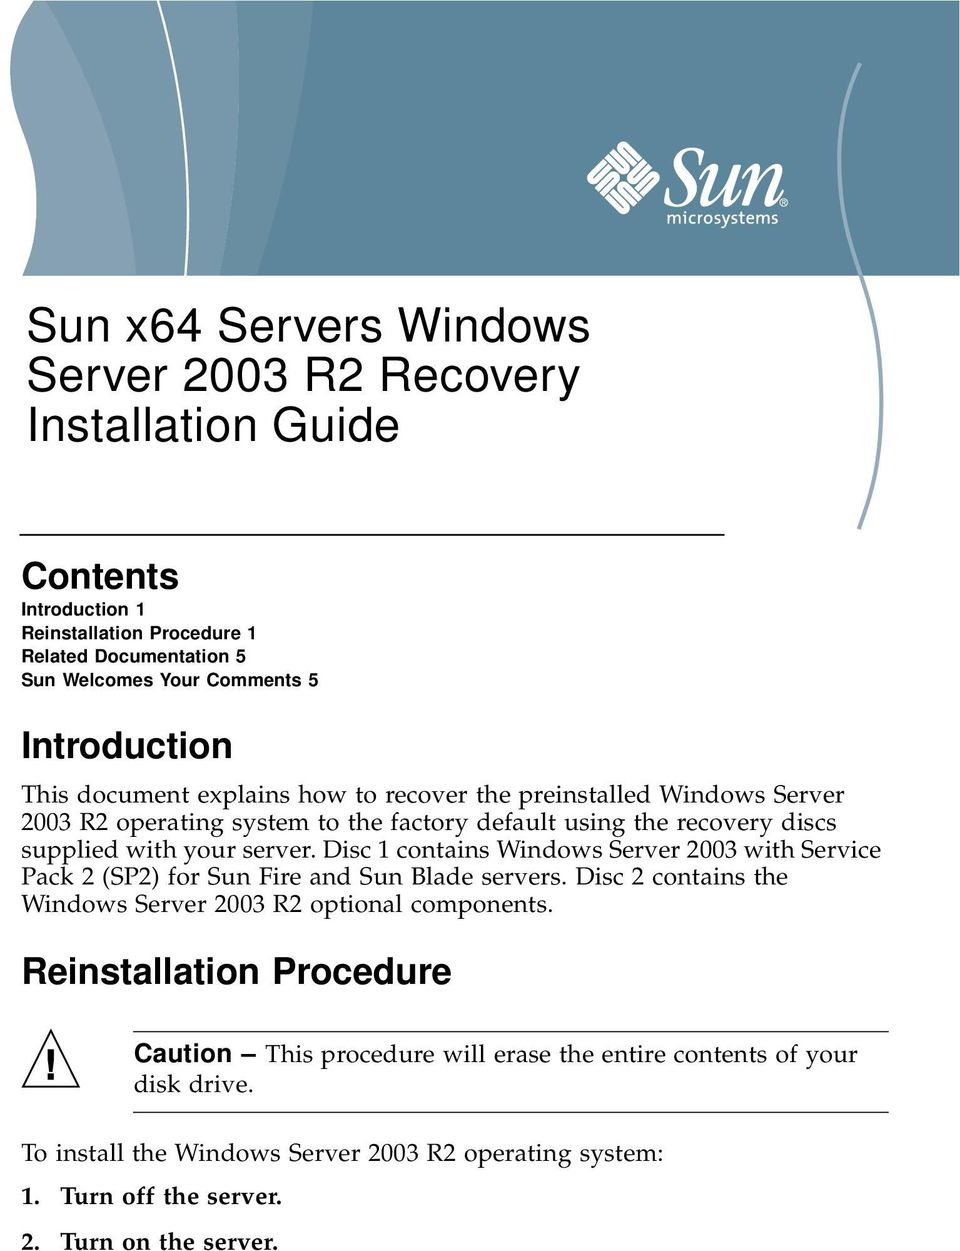 server. Disc 1 contains Windows Server 2003 with Service Pack 2 (SP2) for Sun Fire and Sun Blade servers. Disc 2 contains the Windows Server 2003 R2 optional components.